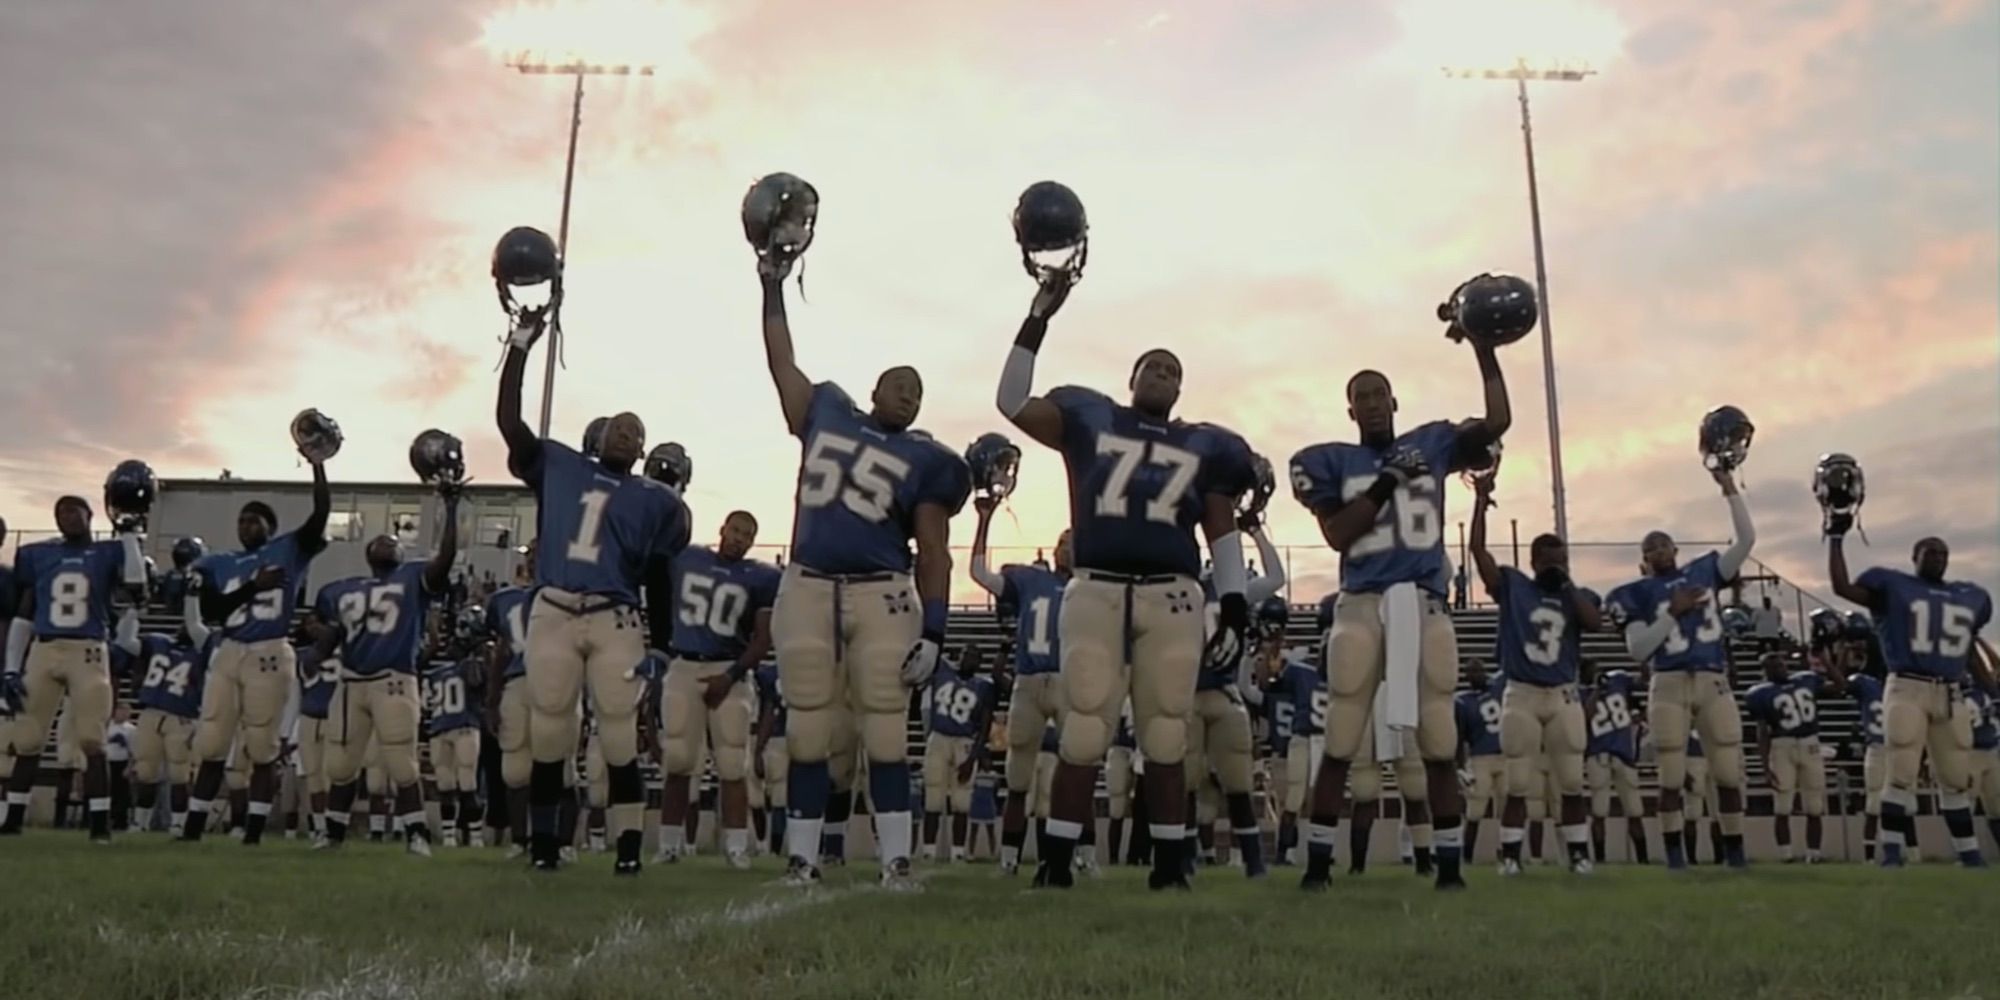 Top 10 Sports Documentaries That Every Fan Should Watch